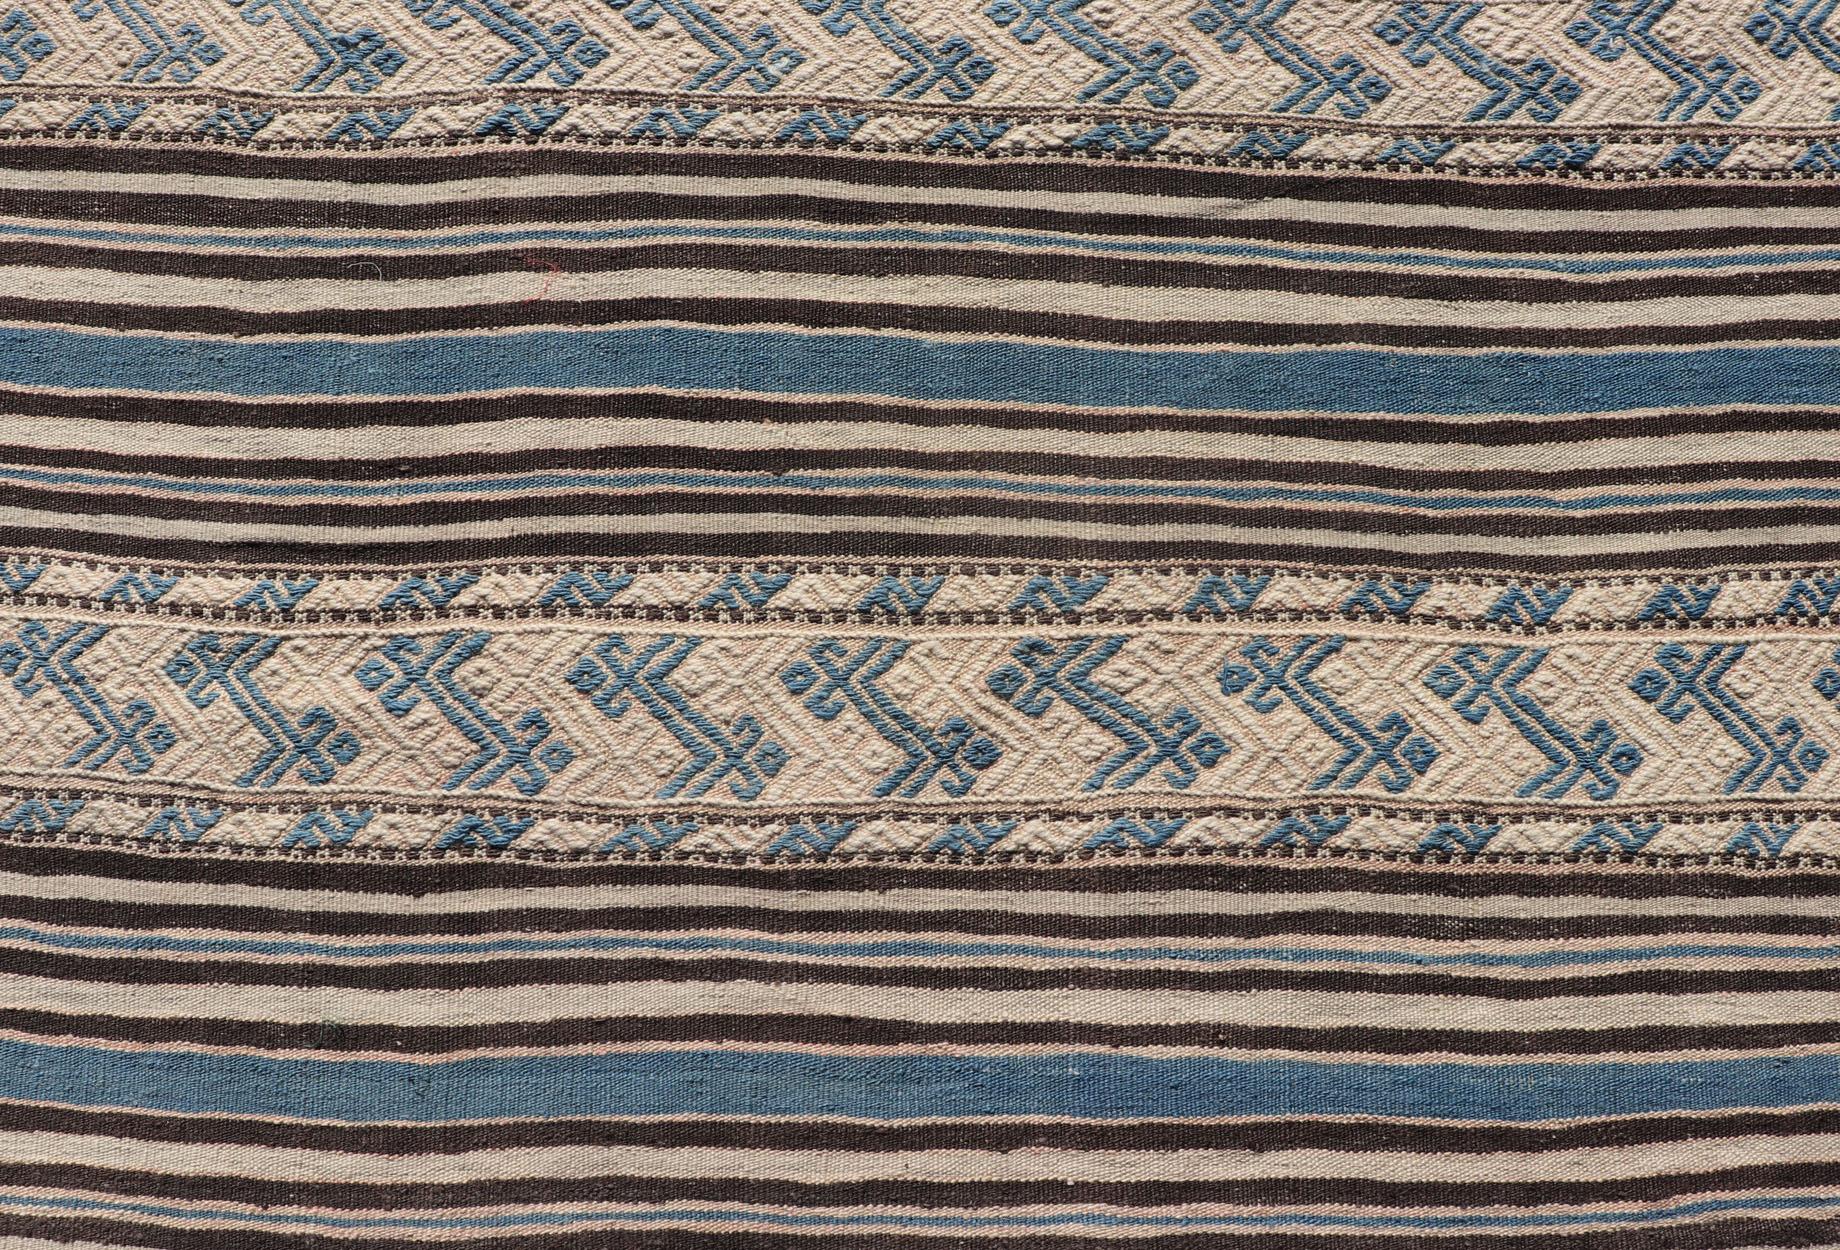 Hand-Knotted Turkish Vintage Flat-Weave with Striped Design and Tribal Motifs in Blue & Brown For Sale